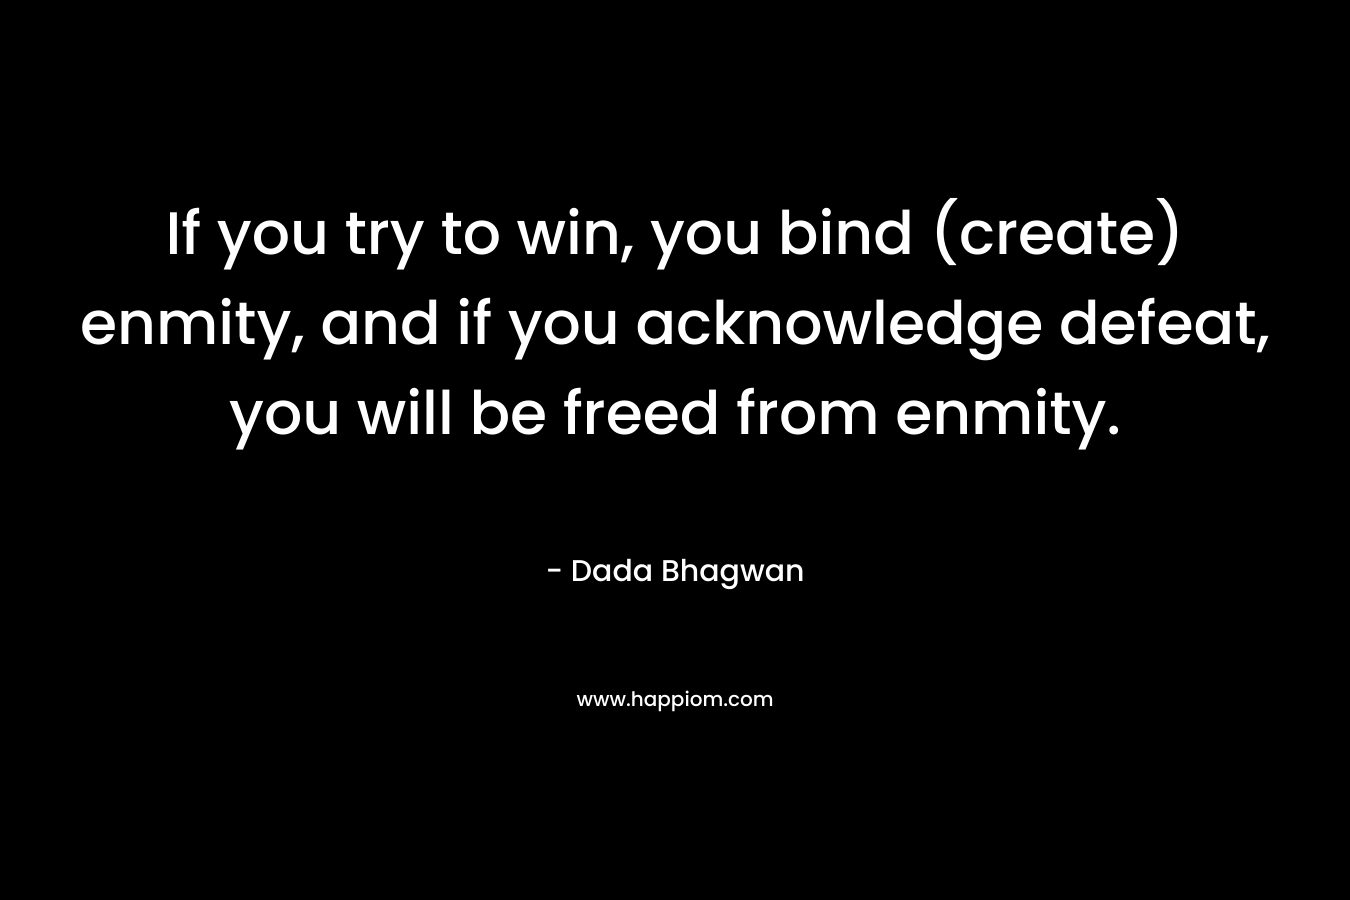 If you try to win, you bind (create) enmity, and if you acknowledge defeat, you will be freed from enmity.